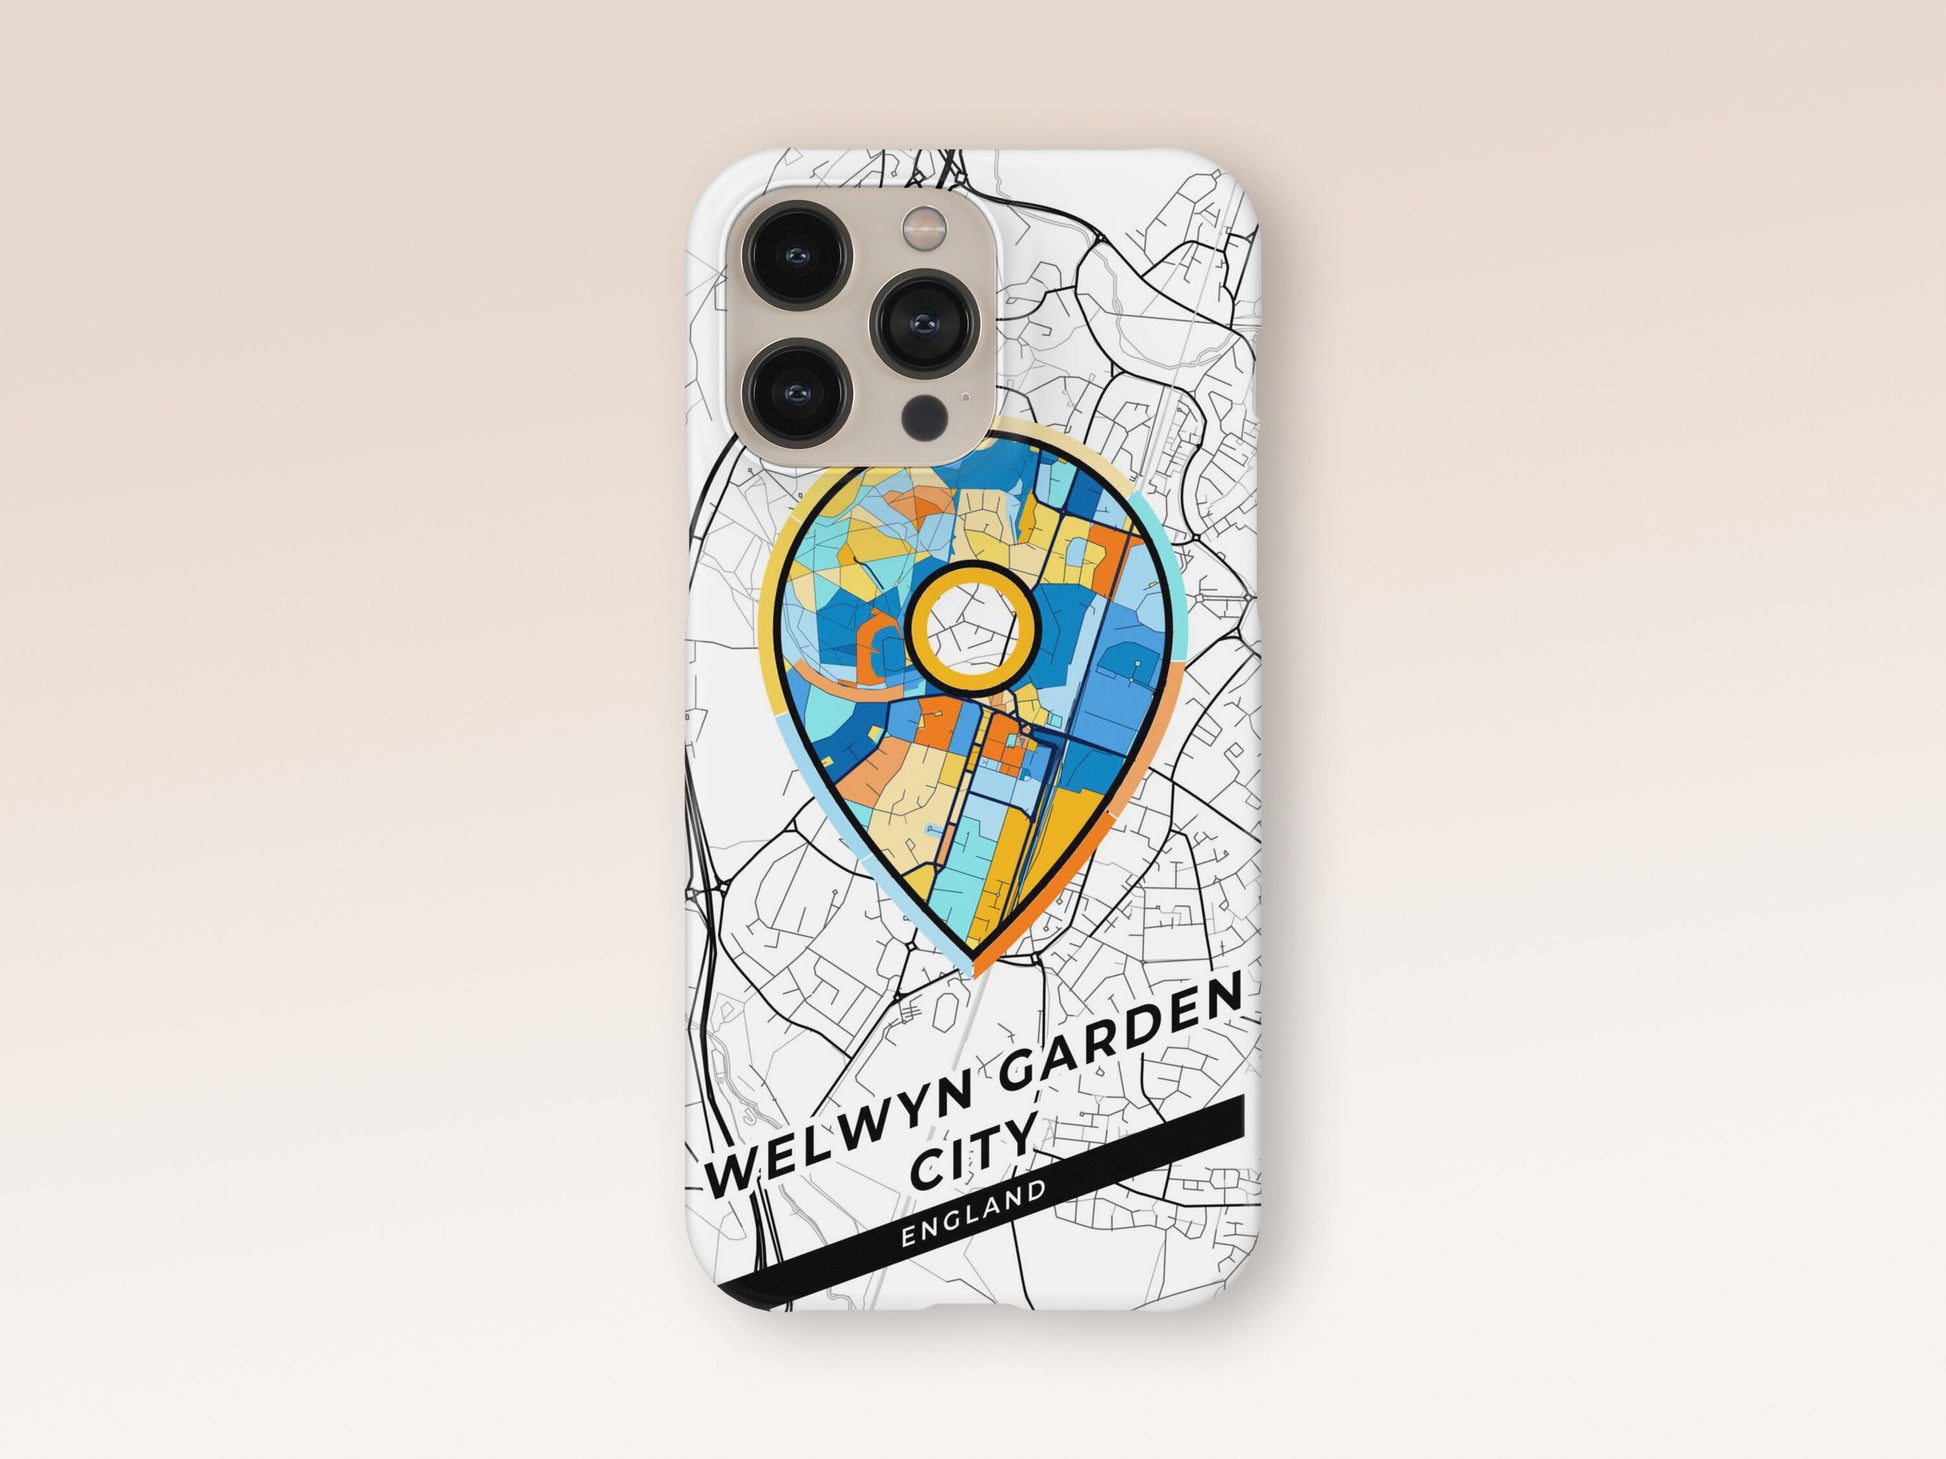 Welwyn Garden City England slim phone case with colorful icon 1